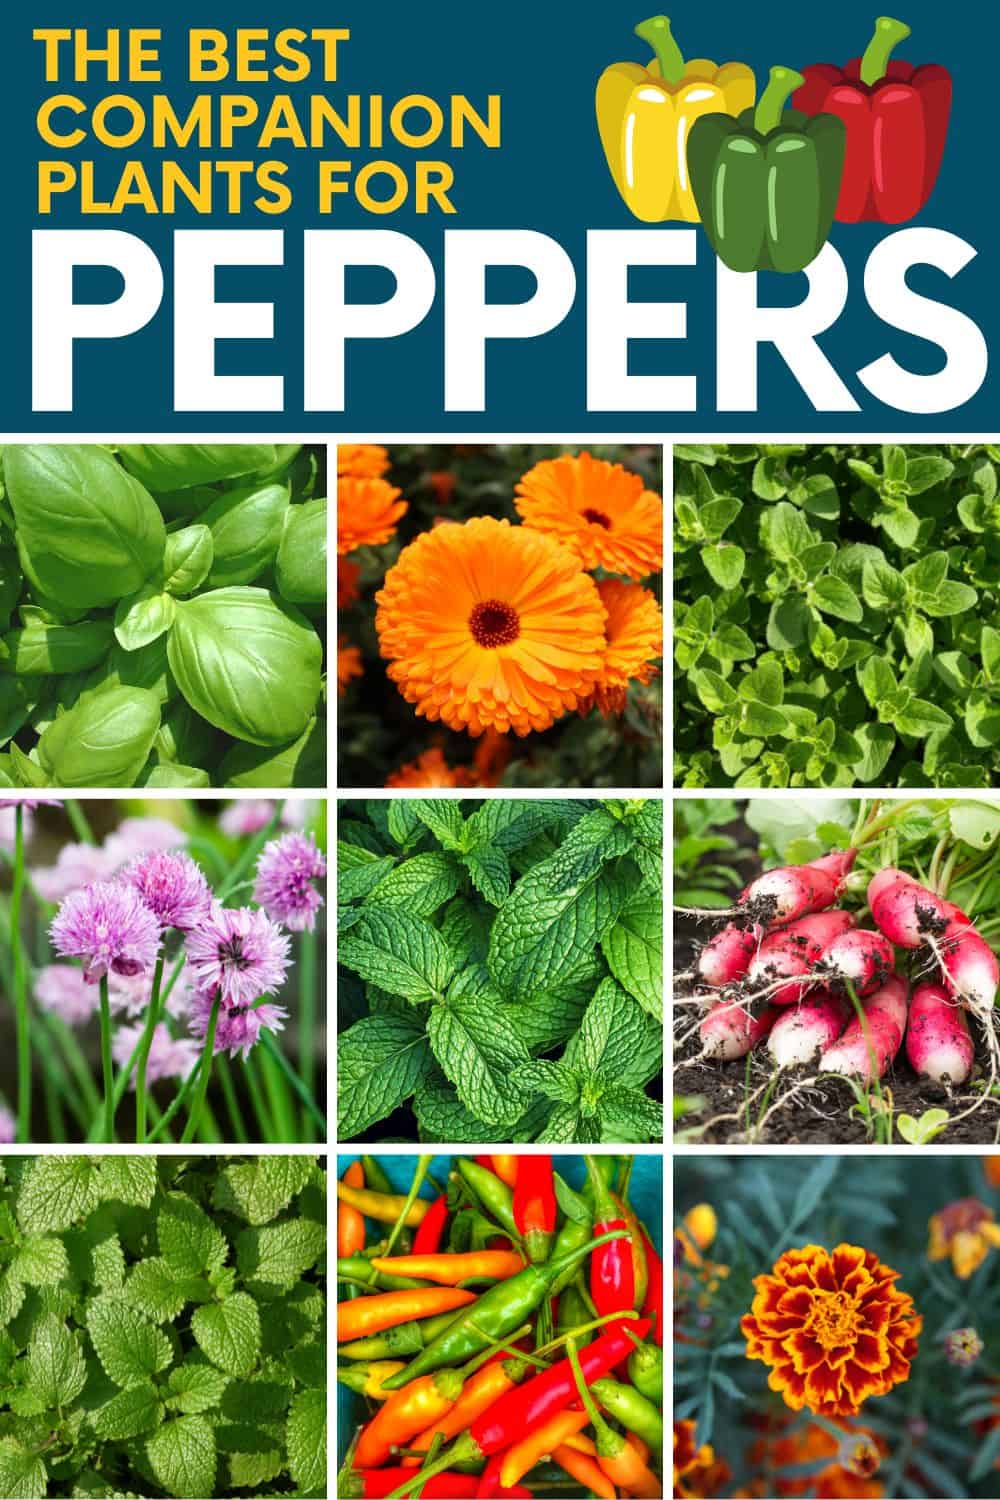 Image of Mint and peppers companion planting 5